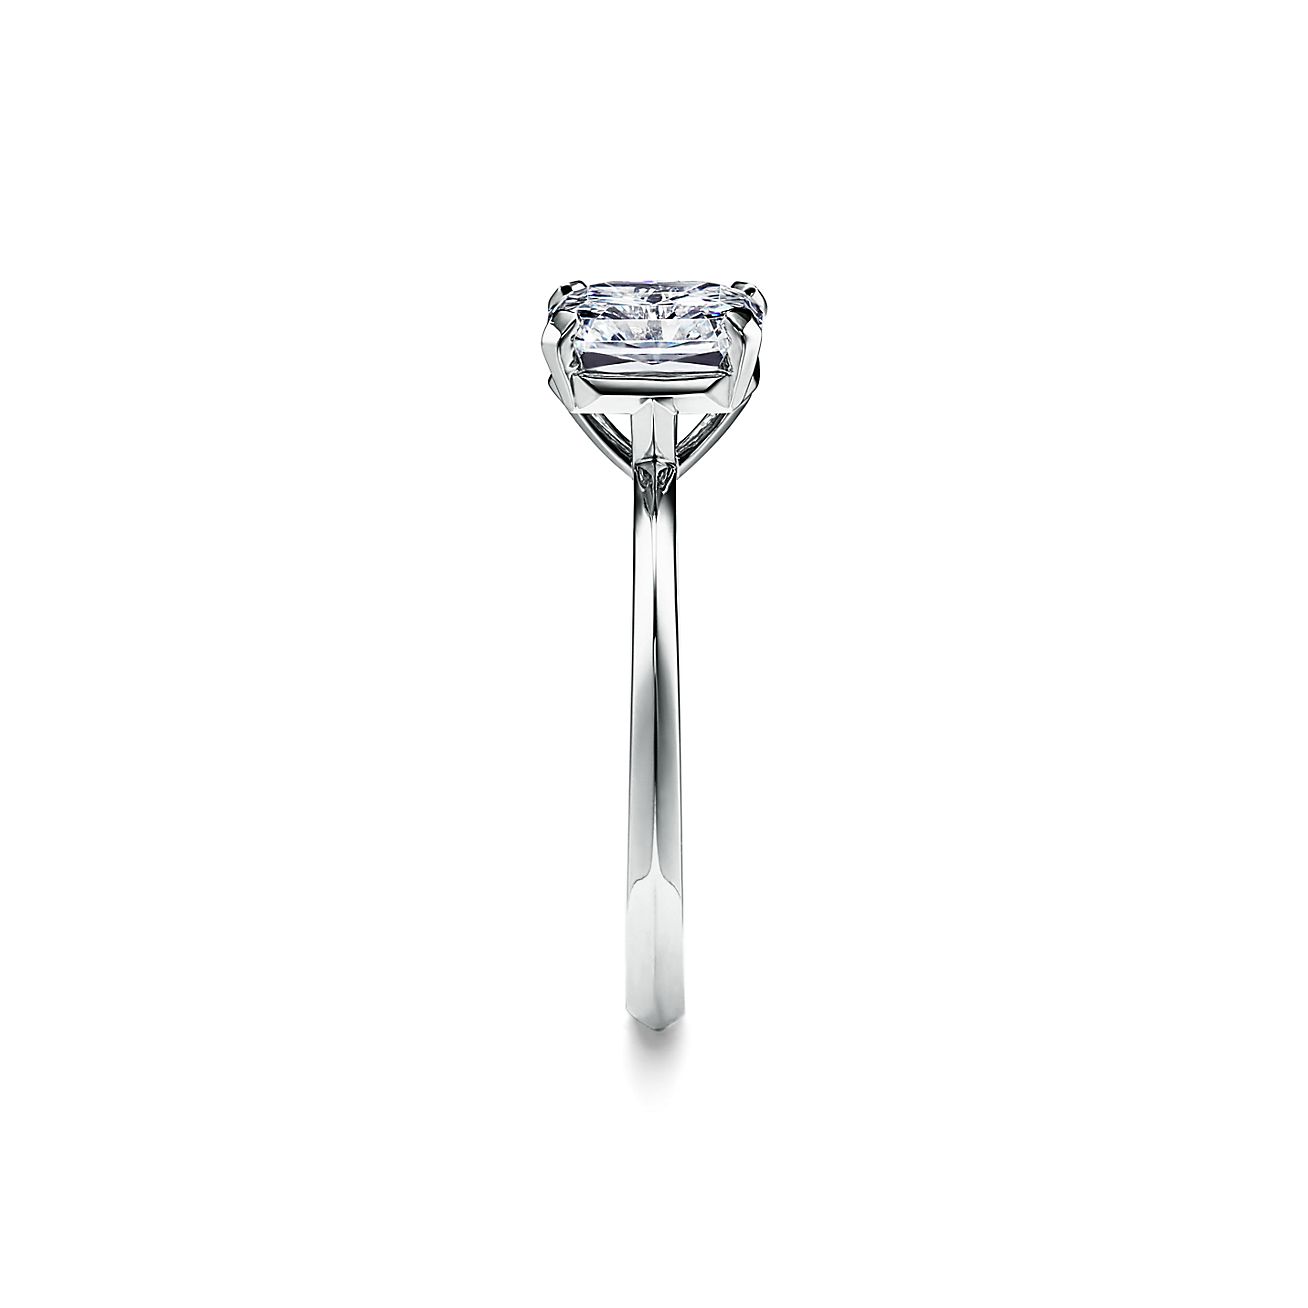 Tiffany True® Engagement Ring with a 